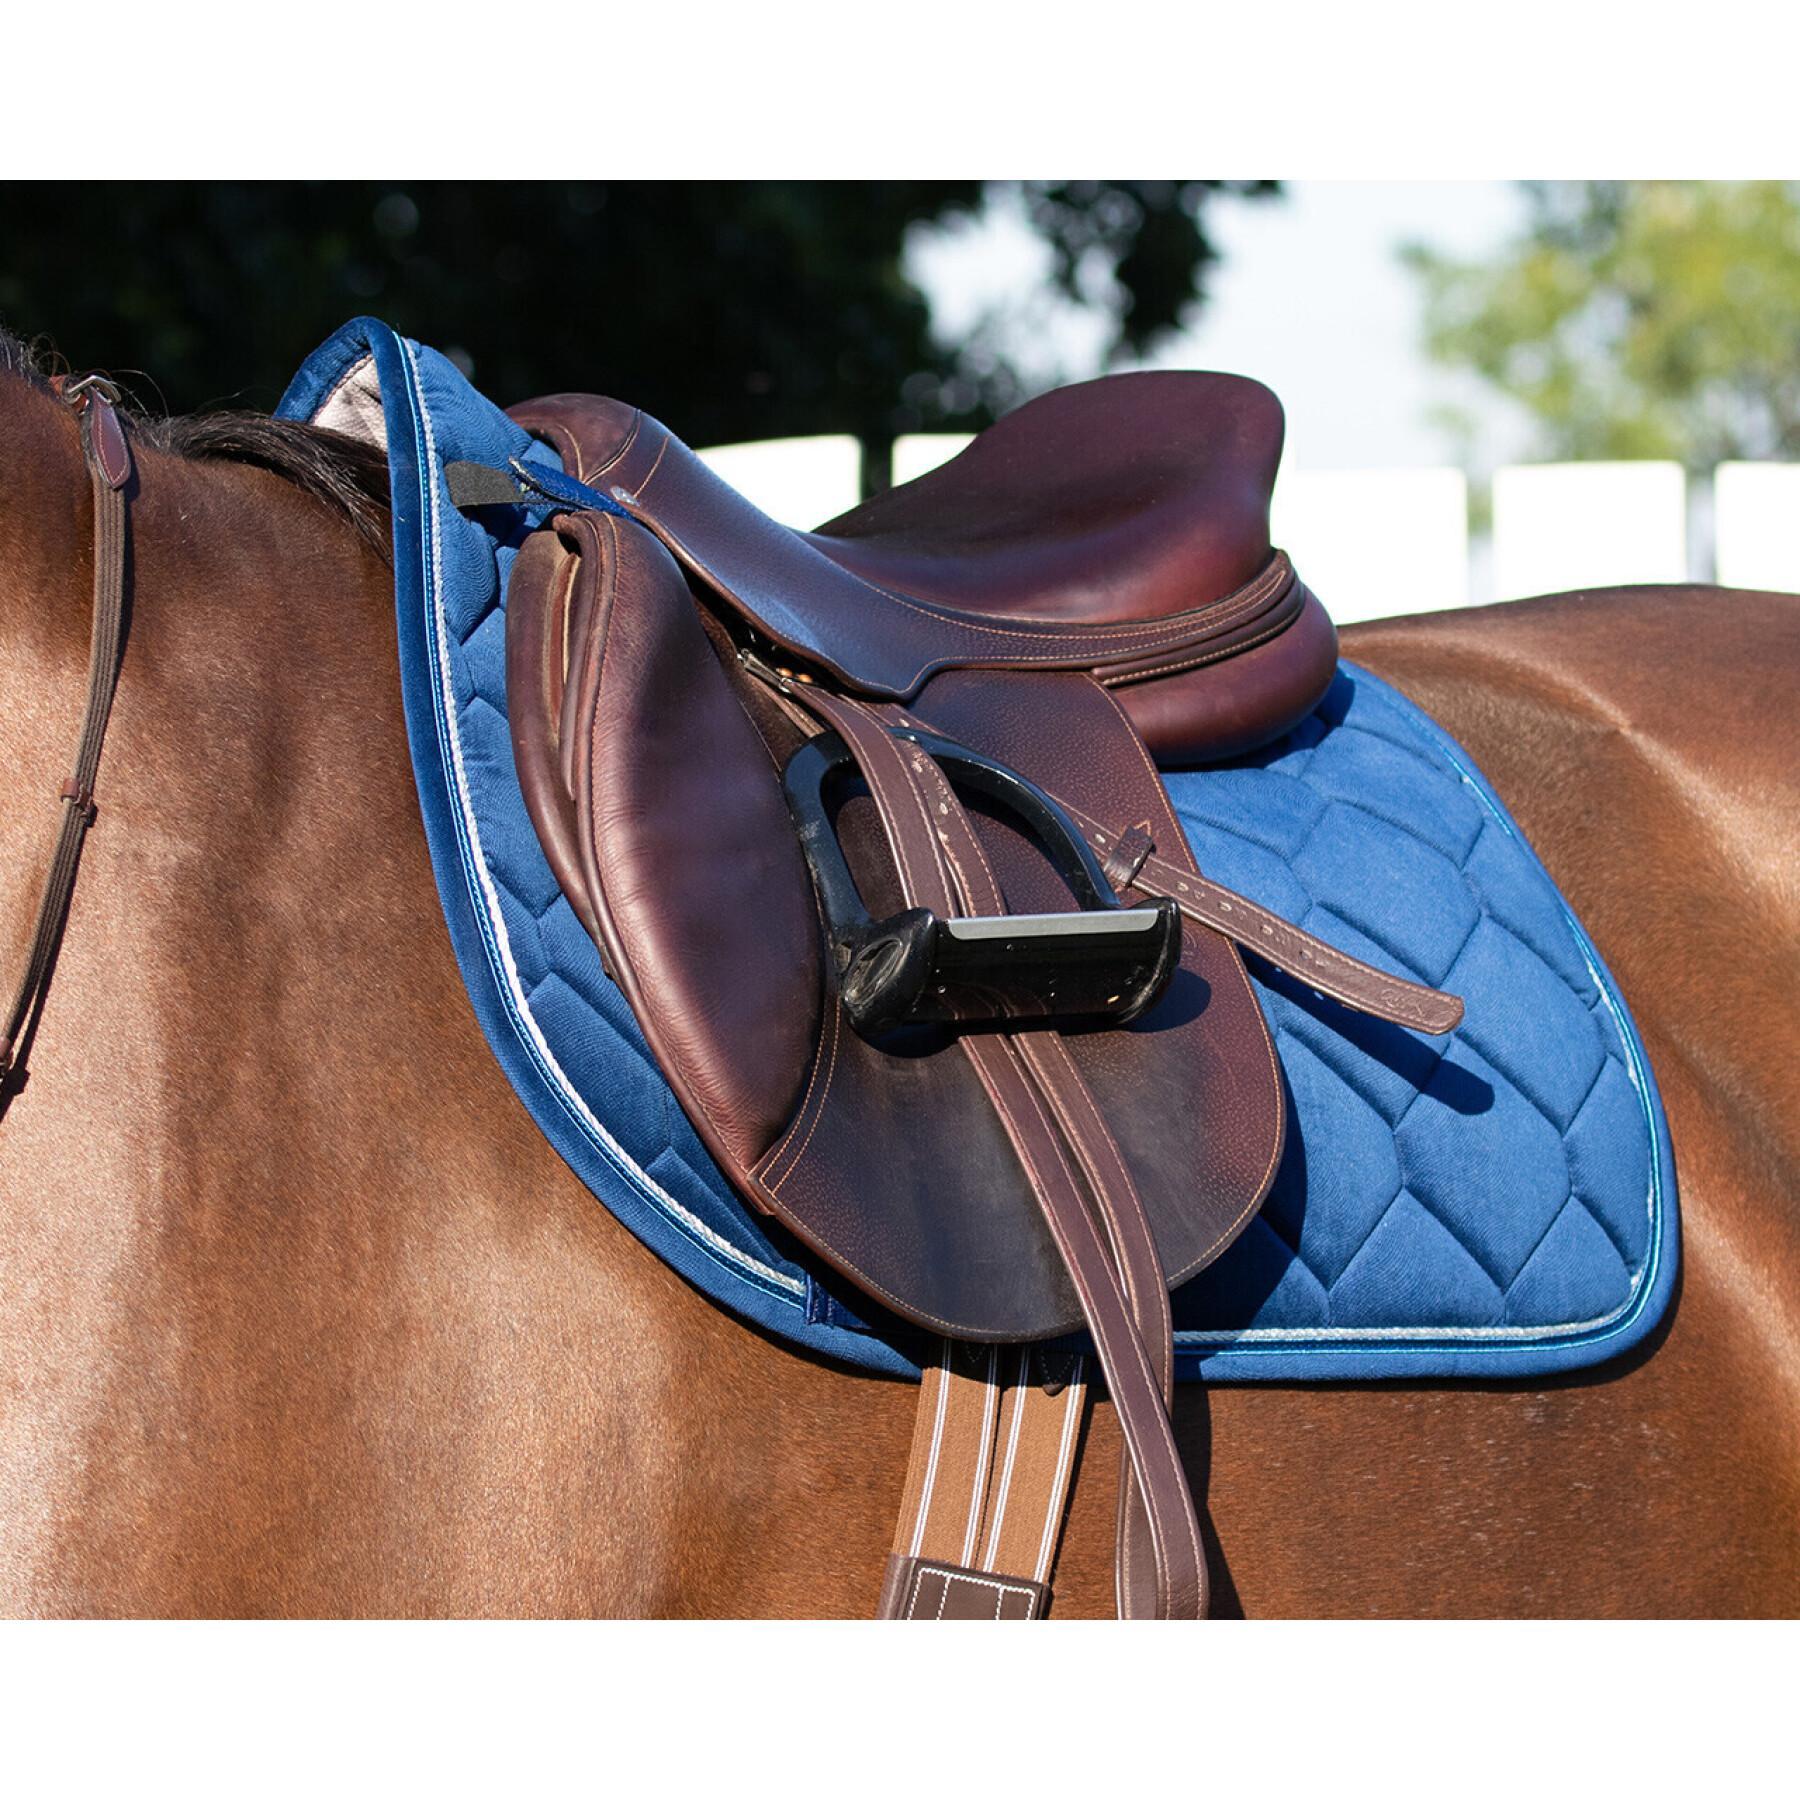 Extra Strong Stirrup Leathers QHP